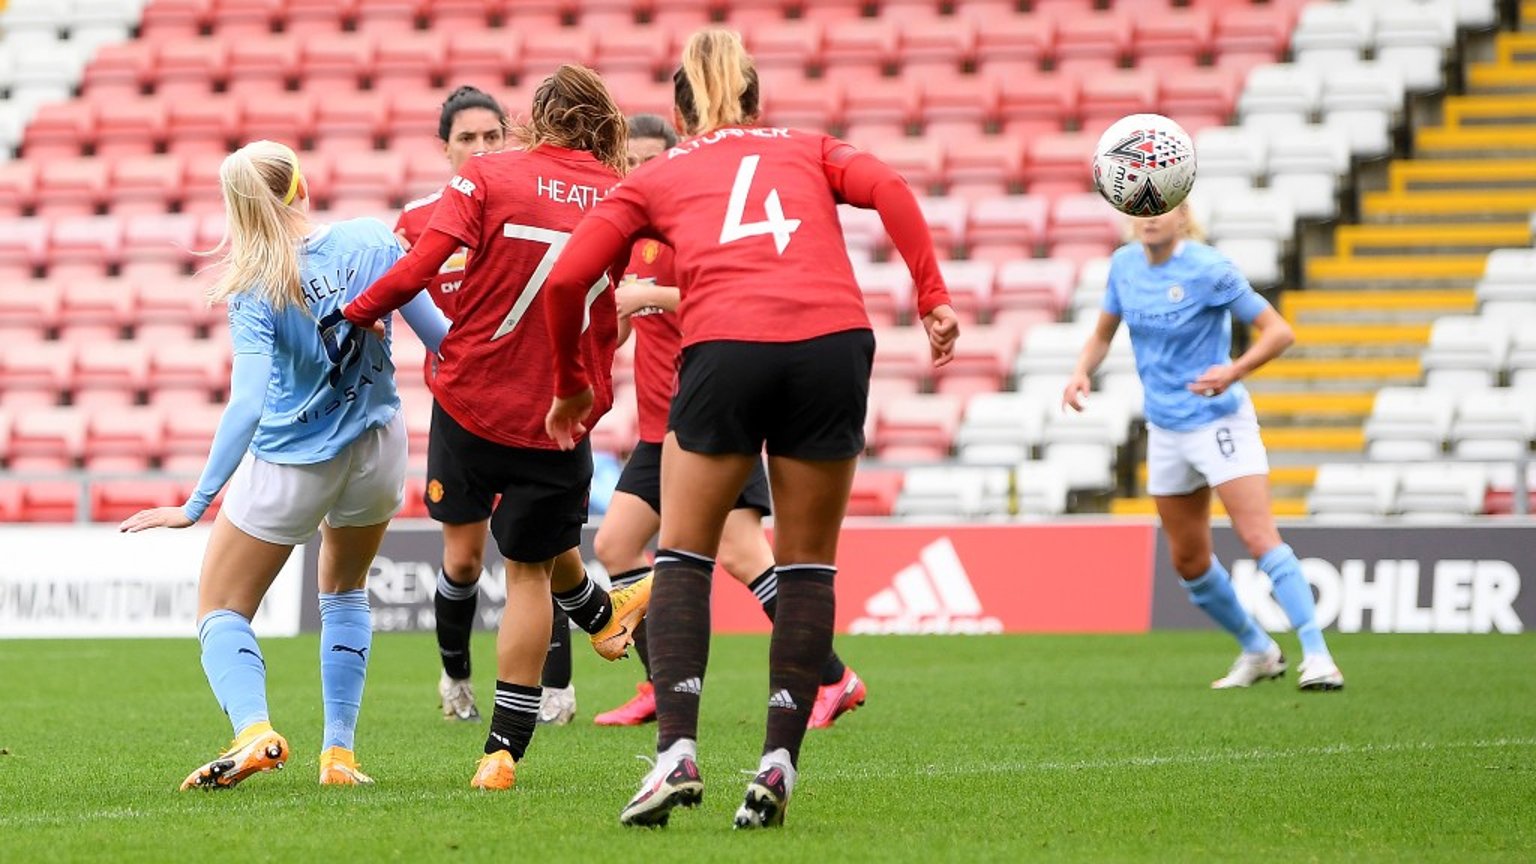 Honours even as City frustrated in WSL derby